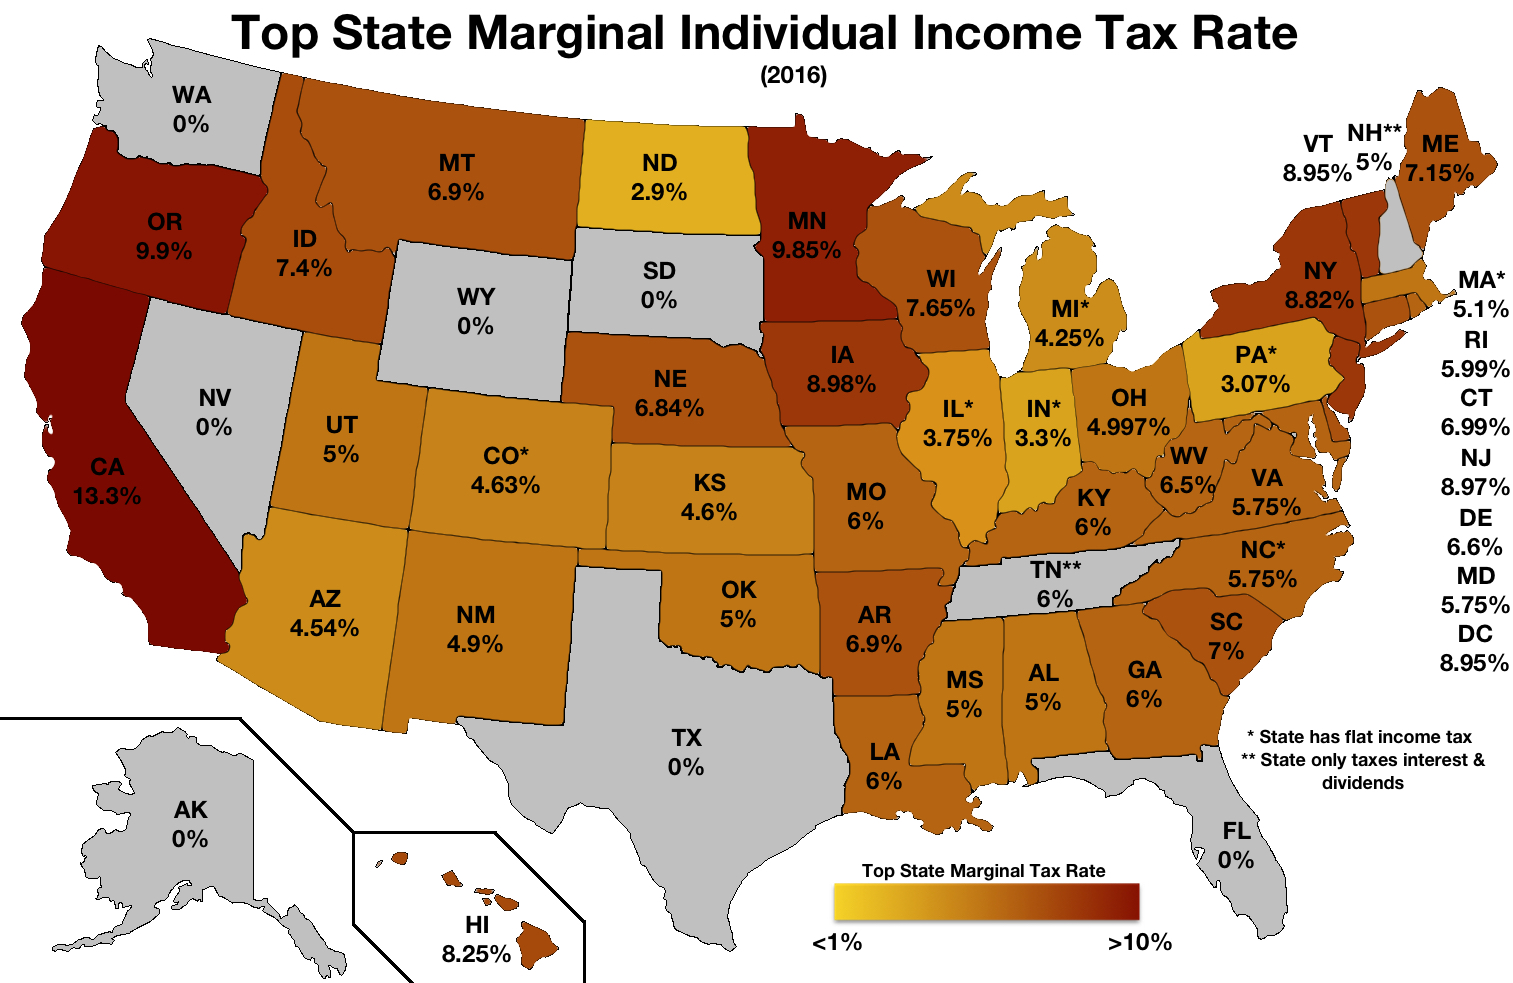 does the u.s. have a flat tax rate